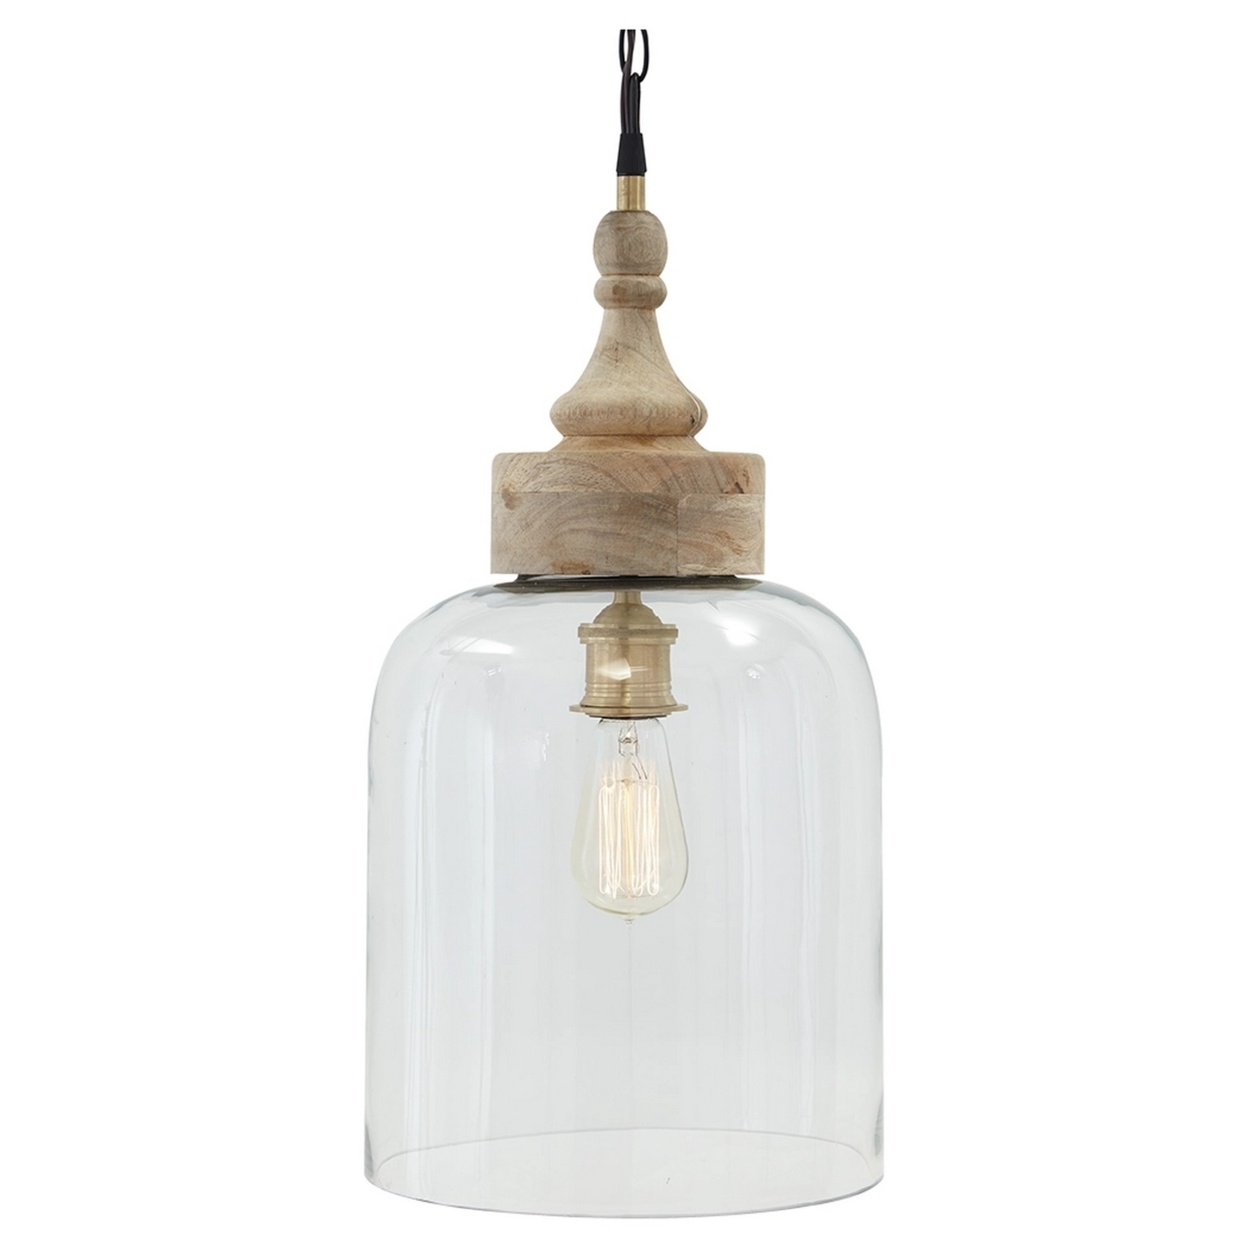 Inverted U Glass Pendant Light With Wood Finial Crown Top, Brown And Clear- Saltoro Sherpi